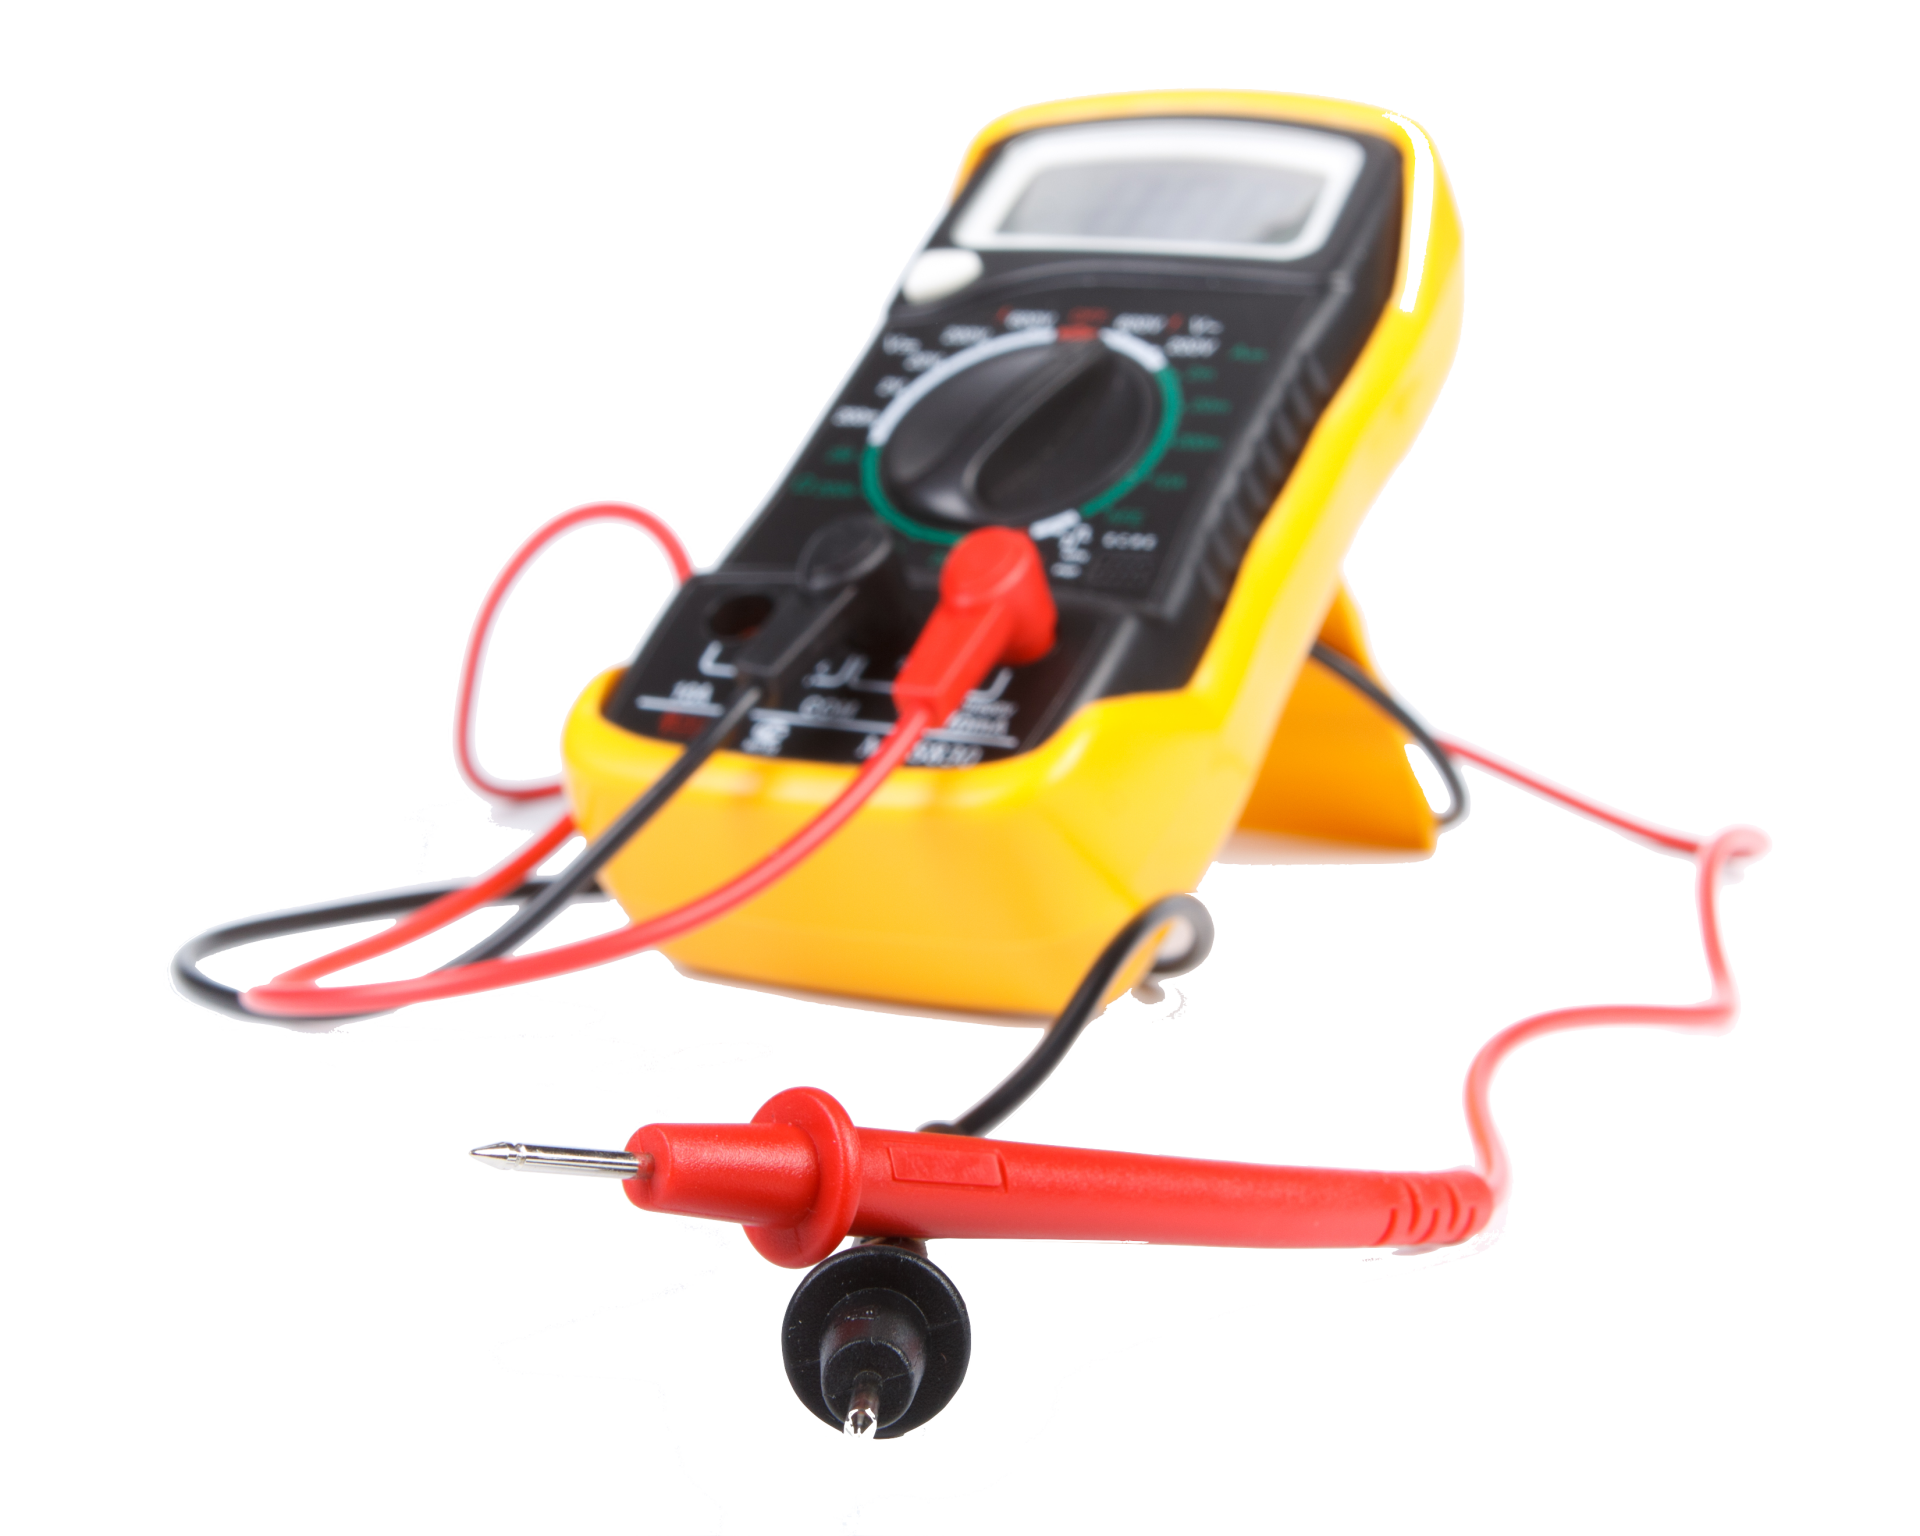 A yellow multimeter with red and black wires attached to it